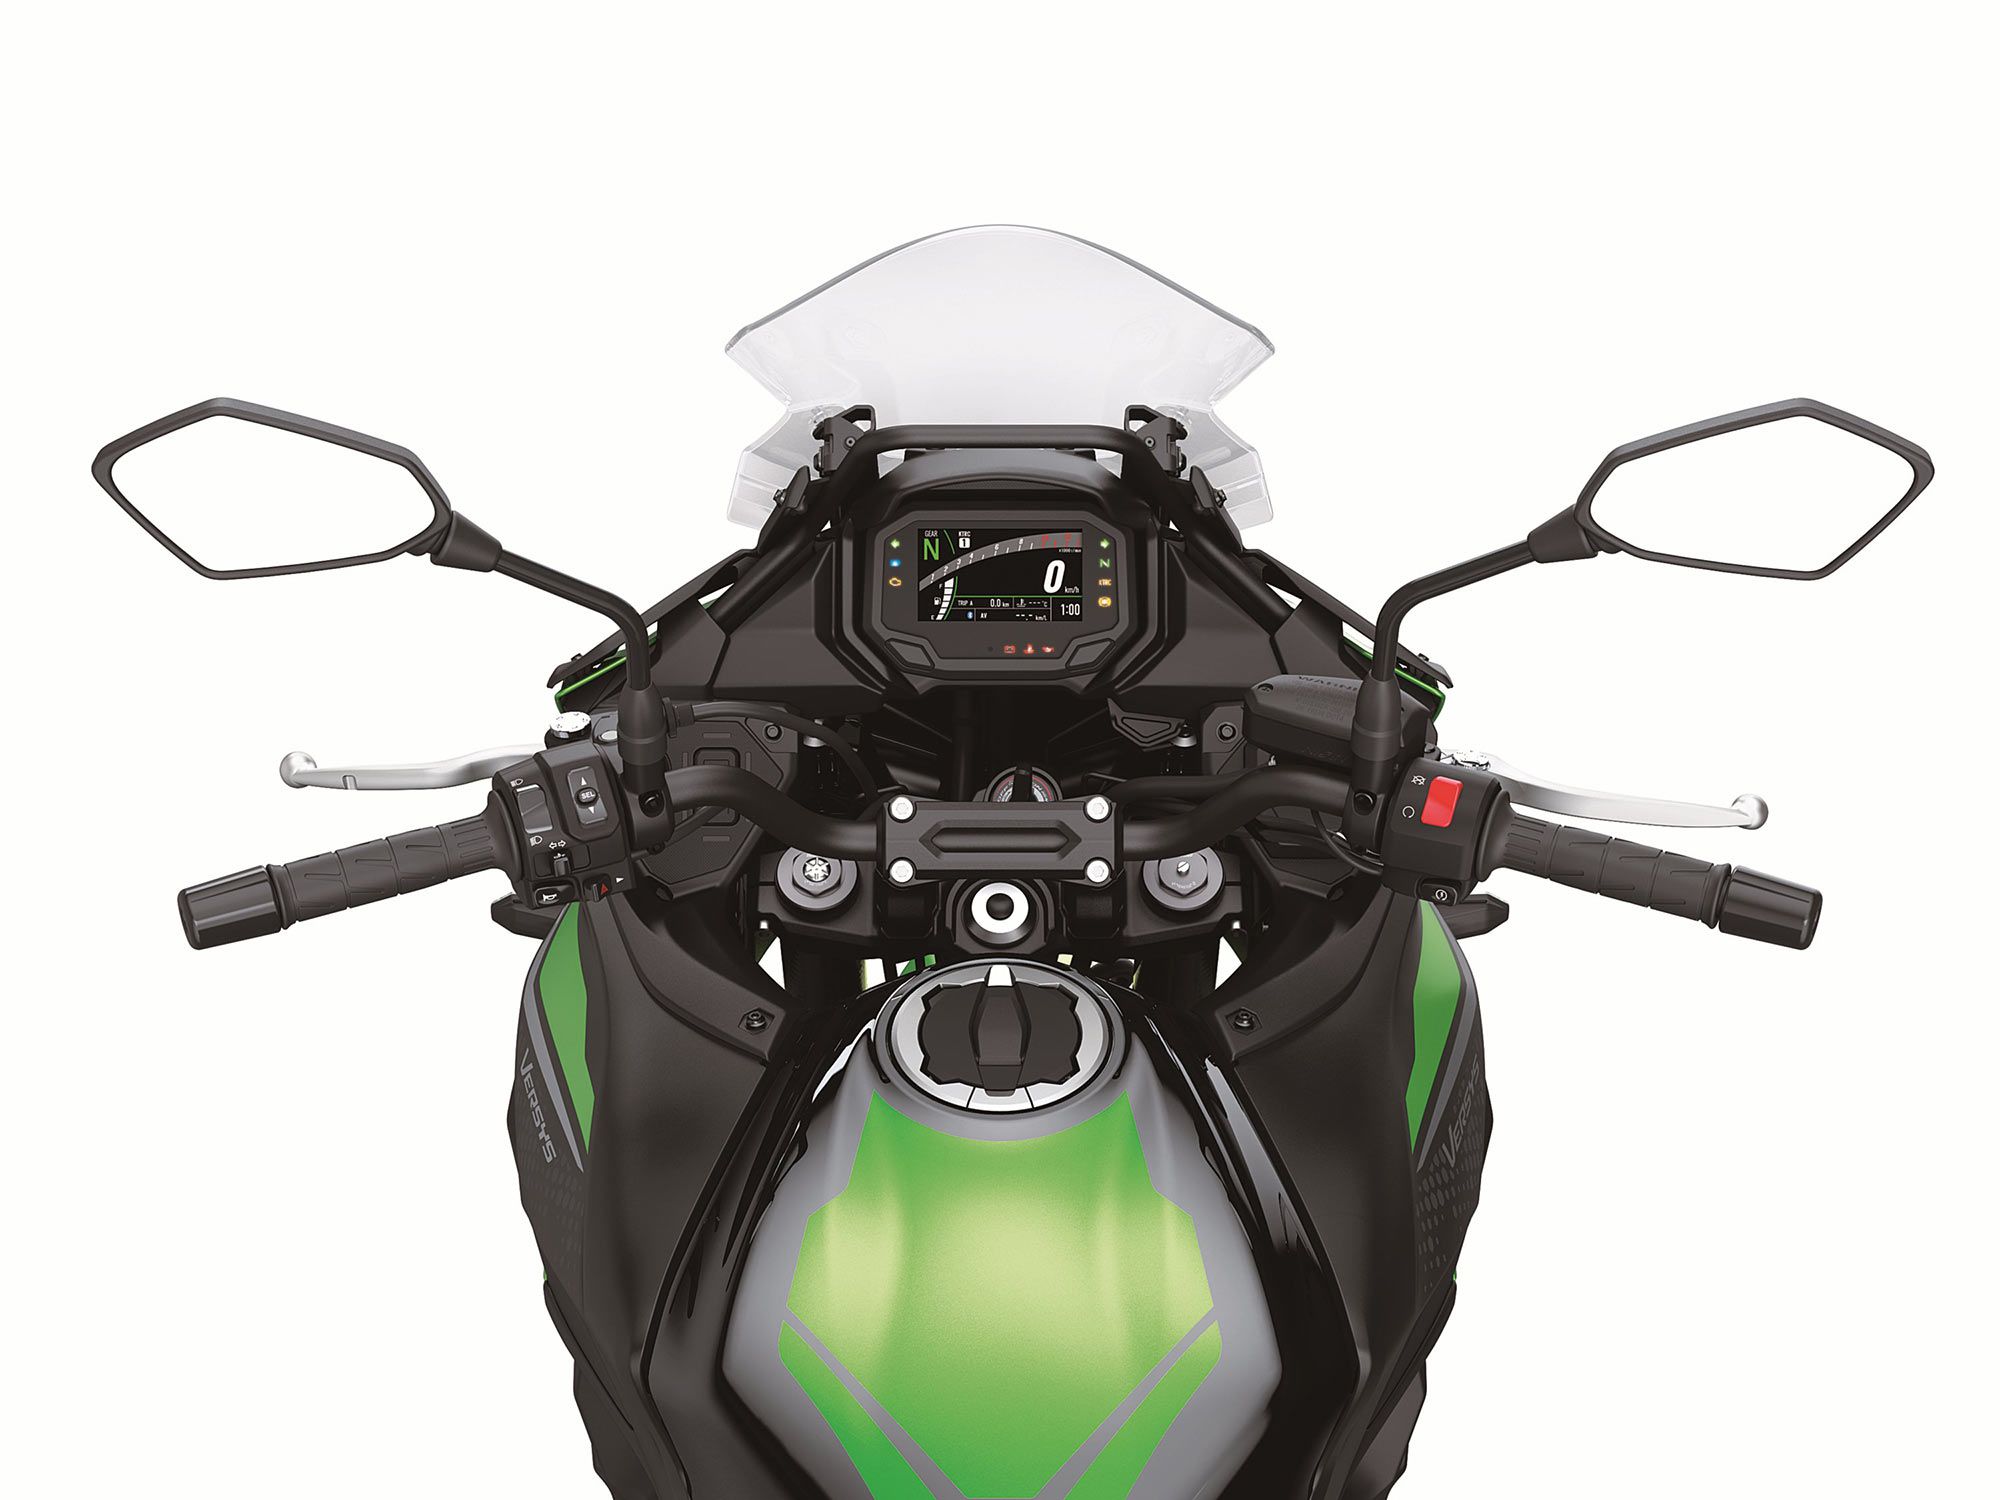 The dash is new and improved. It keeps the rider updated with mass amounts of information yet is easy to read. Bluetooth connectivity is another feature that brings the Versys 650 into the 21st century.